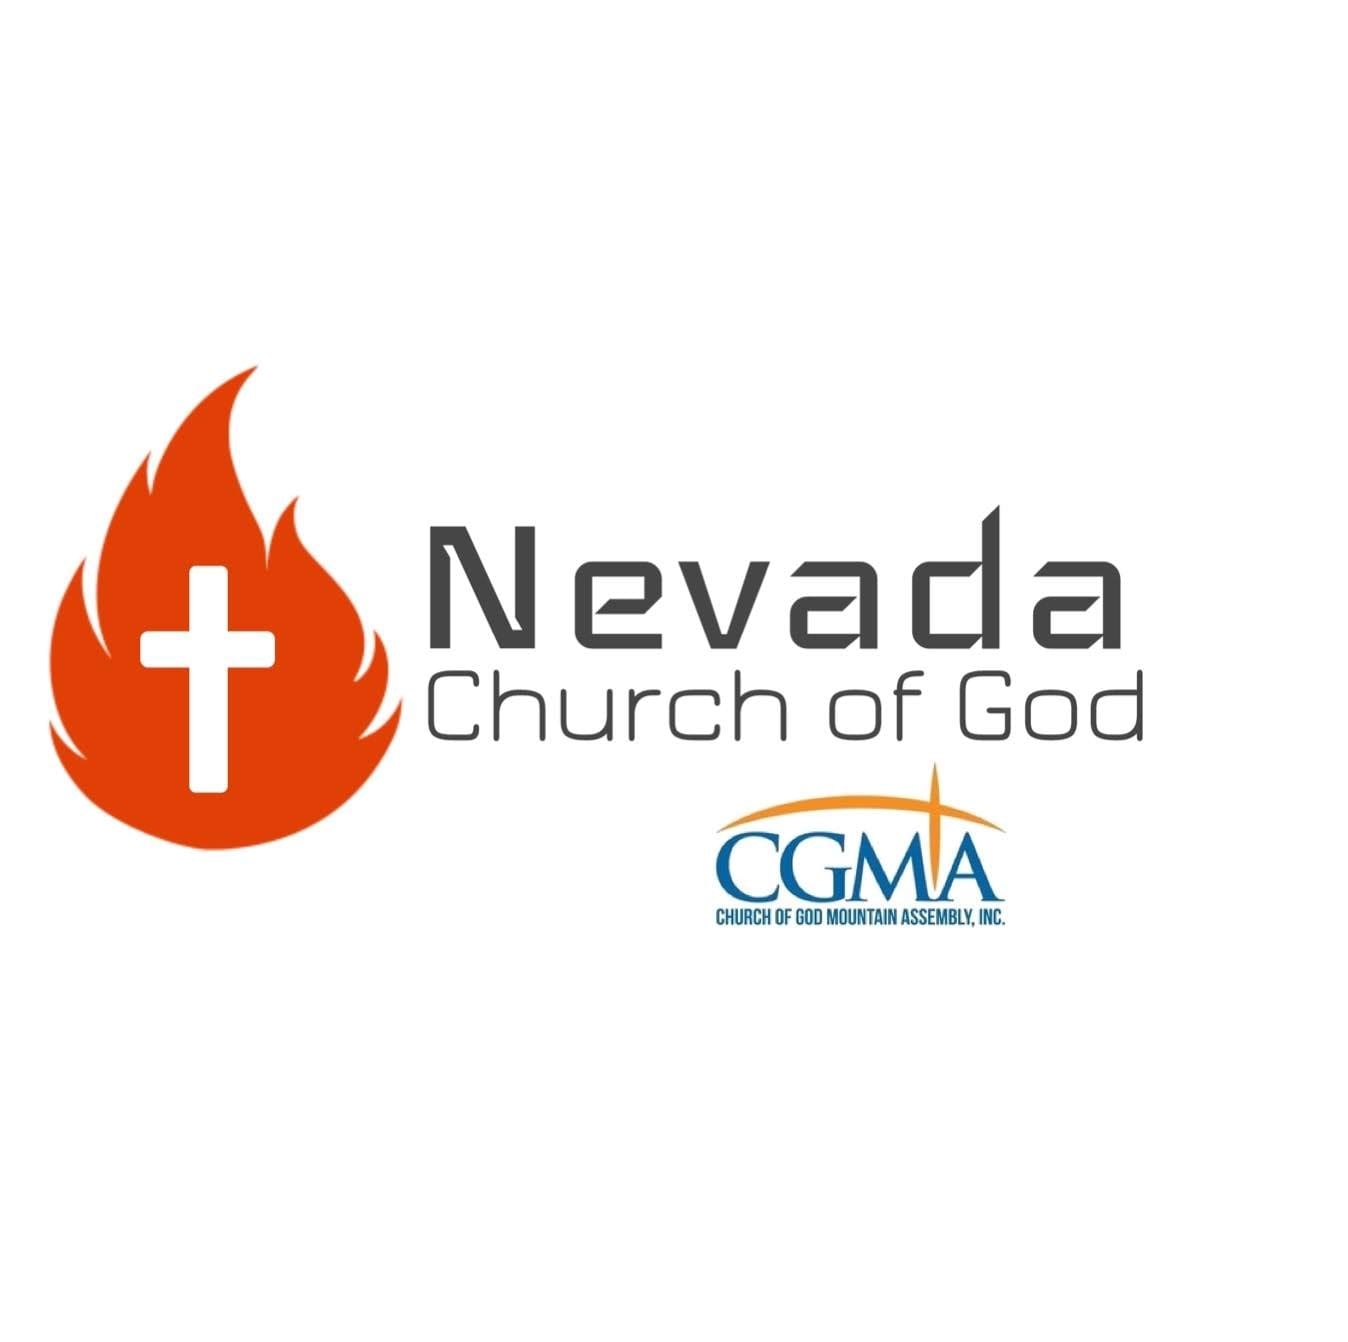 Nevada Church of God of the Mountain Assembly